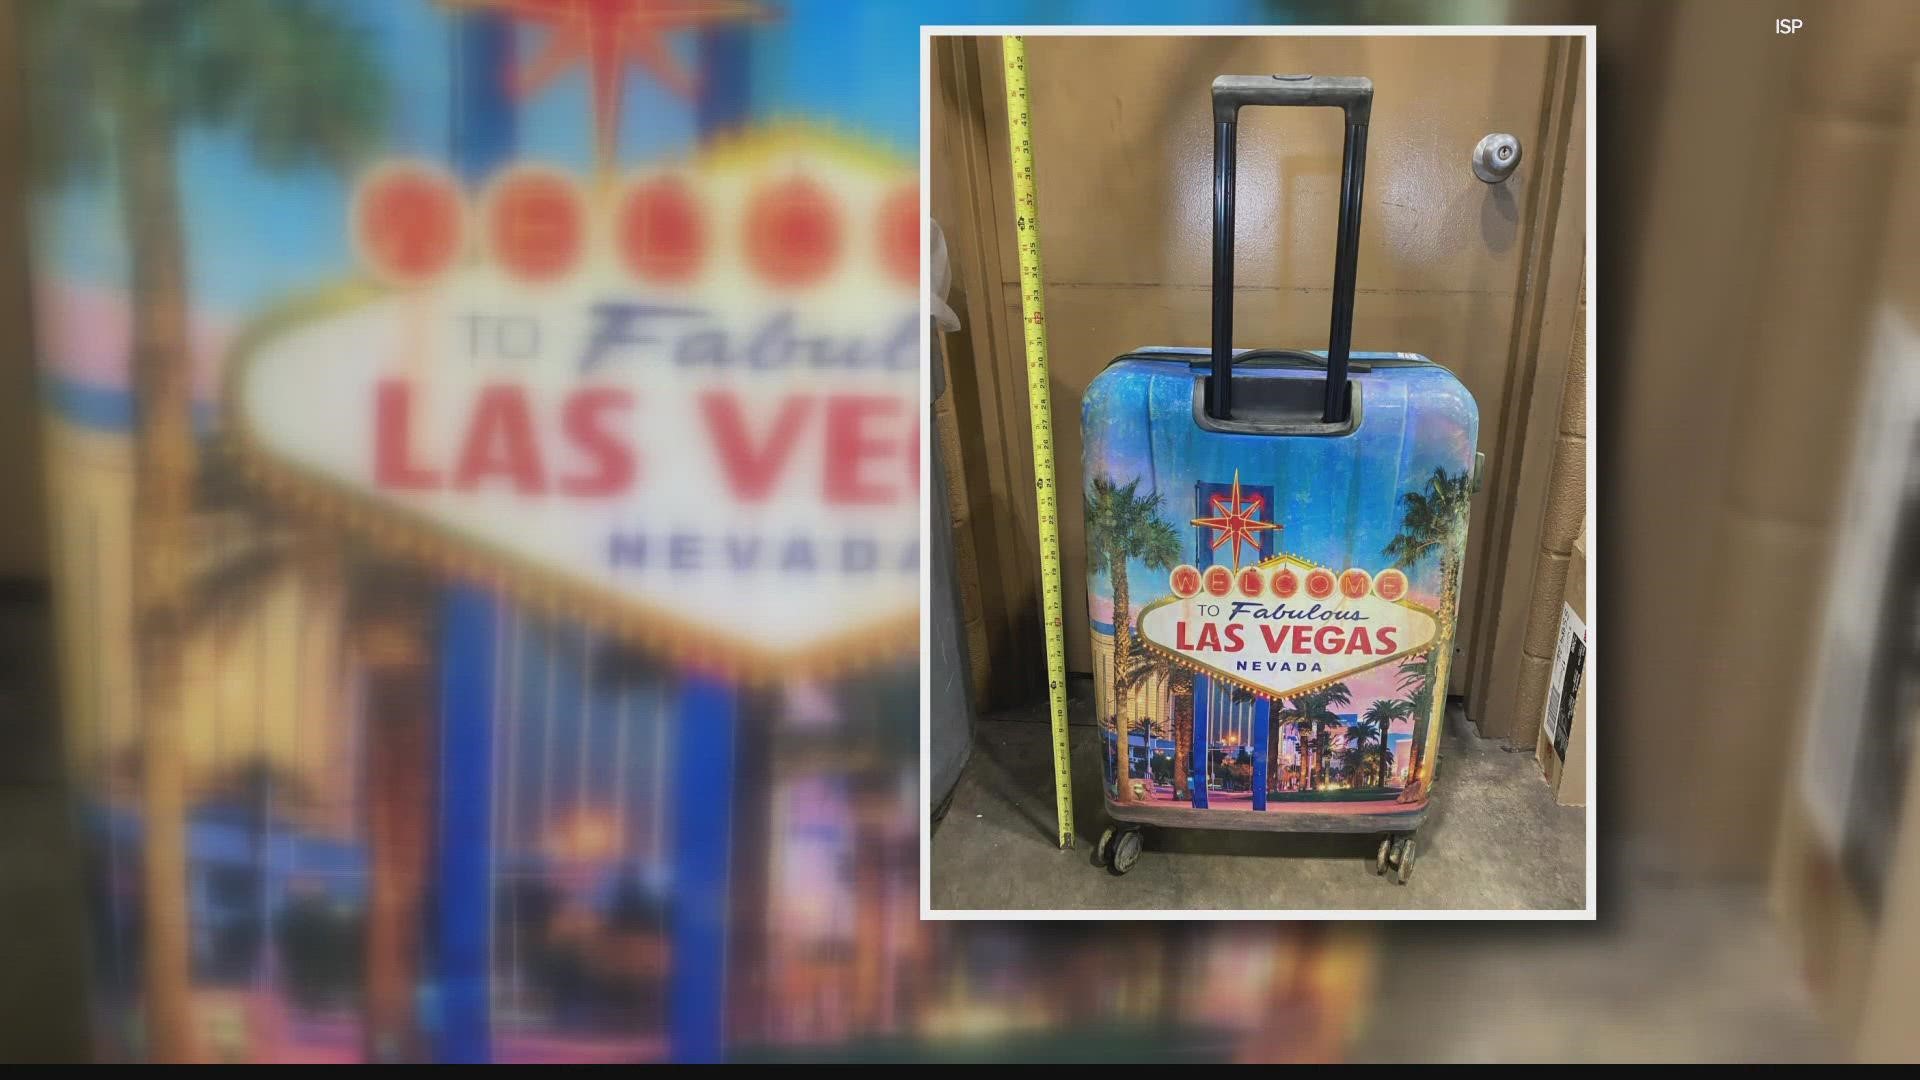 Have you seen this suitcase? Investigators said this is what a little boy was found inside in southern Indiana.